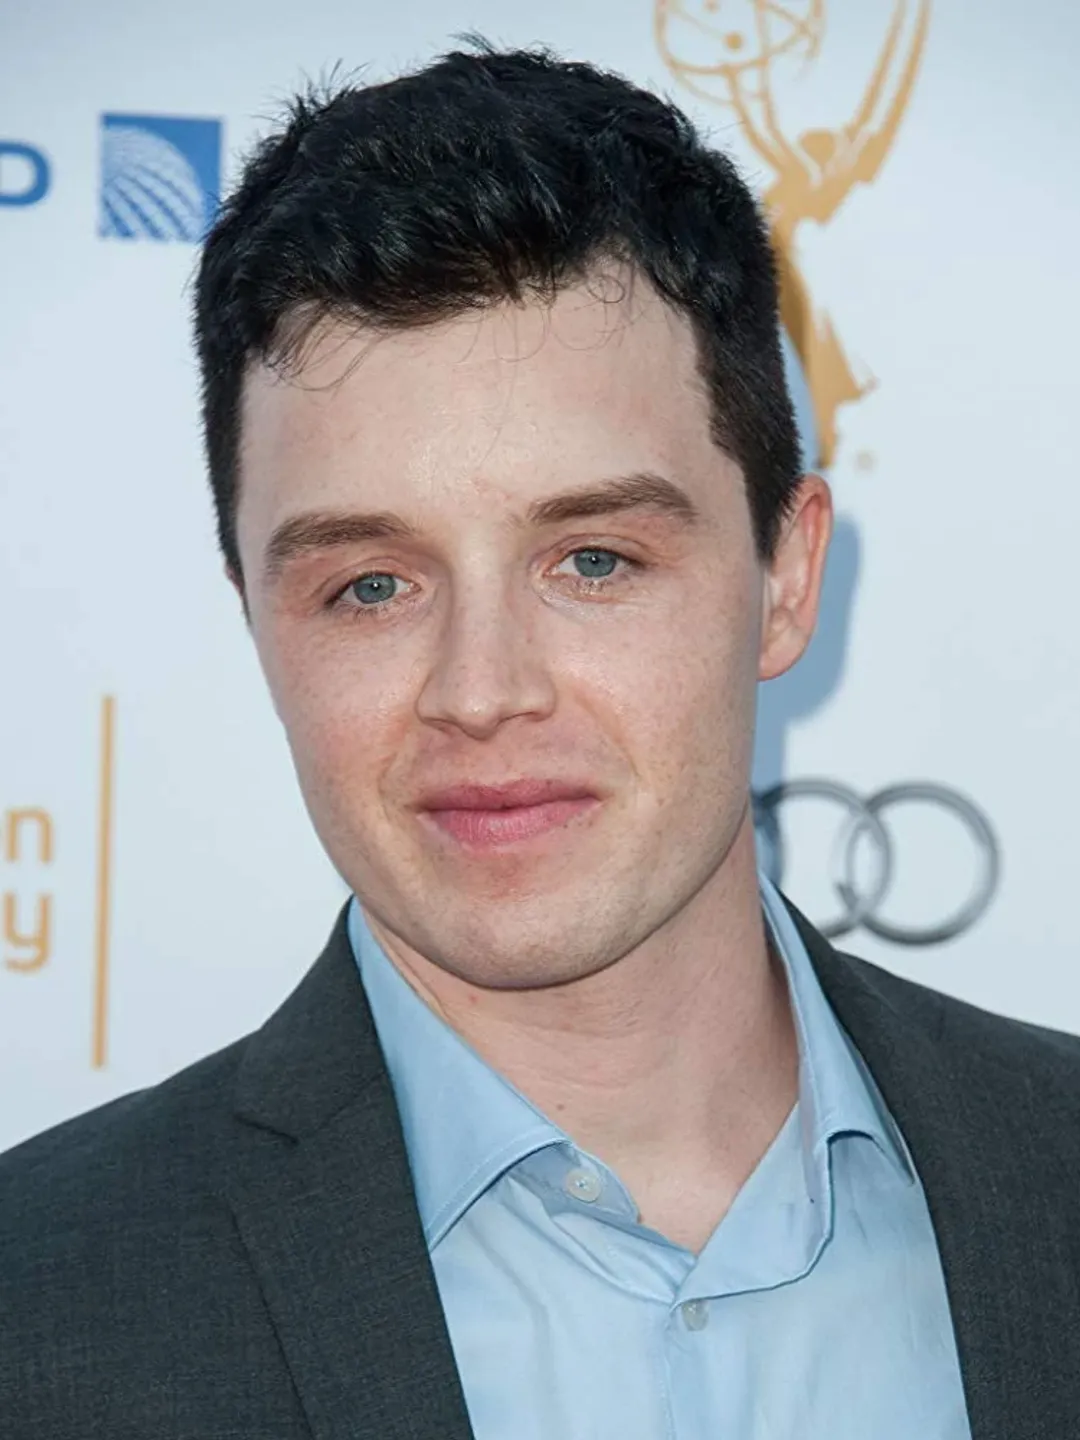 Noel Fisher early life